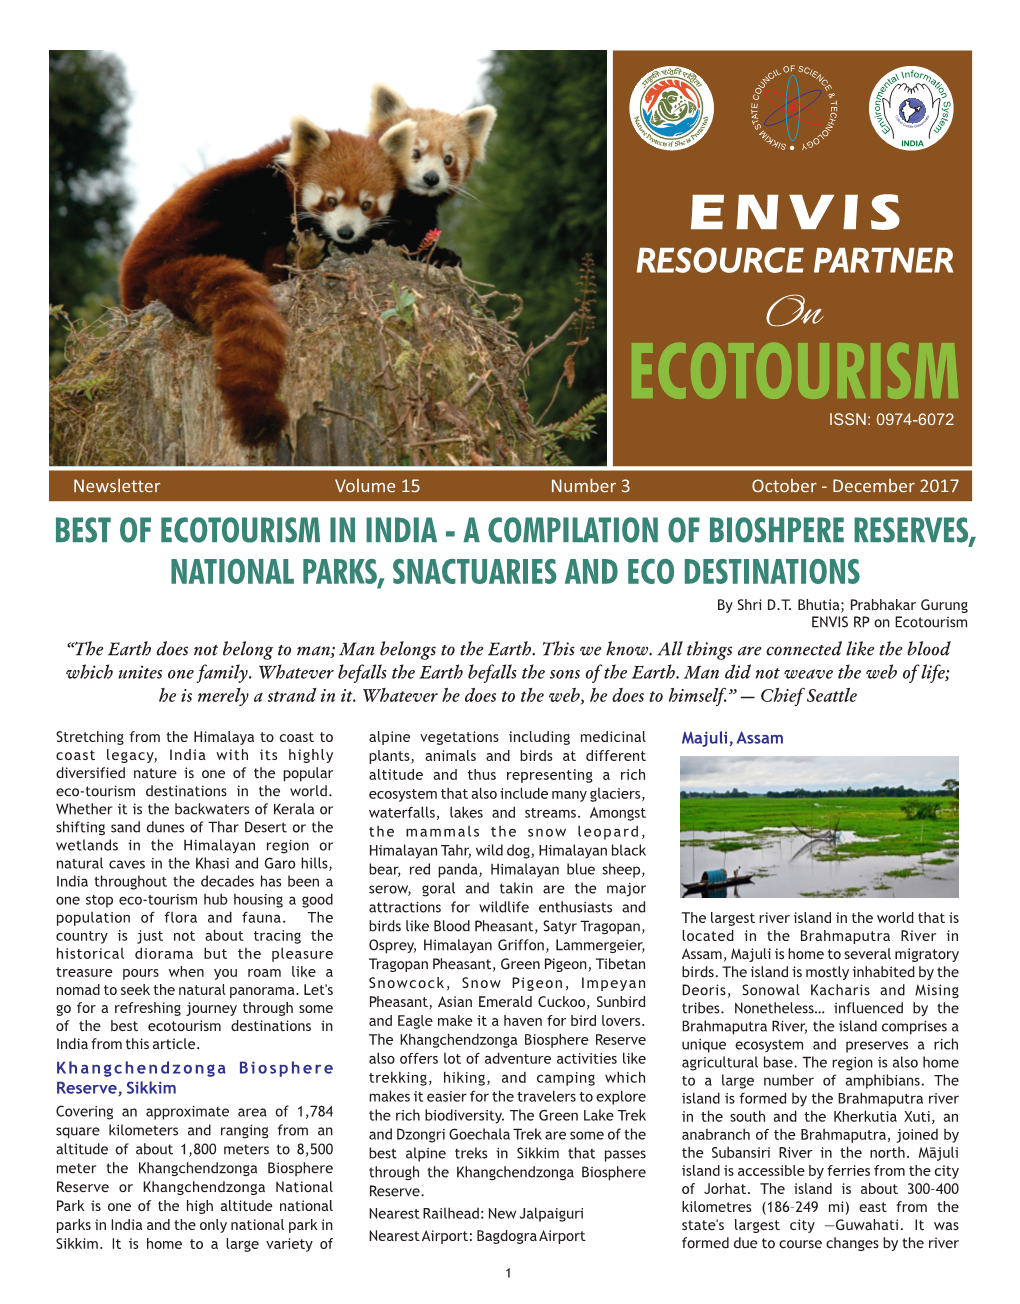 October - December 2017 BEST of ECOTOURISM in INDIA - a COMPILATION of BIOSHPERE RESERVES, NATIONAL PARKS, SNACTUARIES and ECO DESTINATIONS by Shri D.T